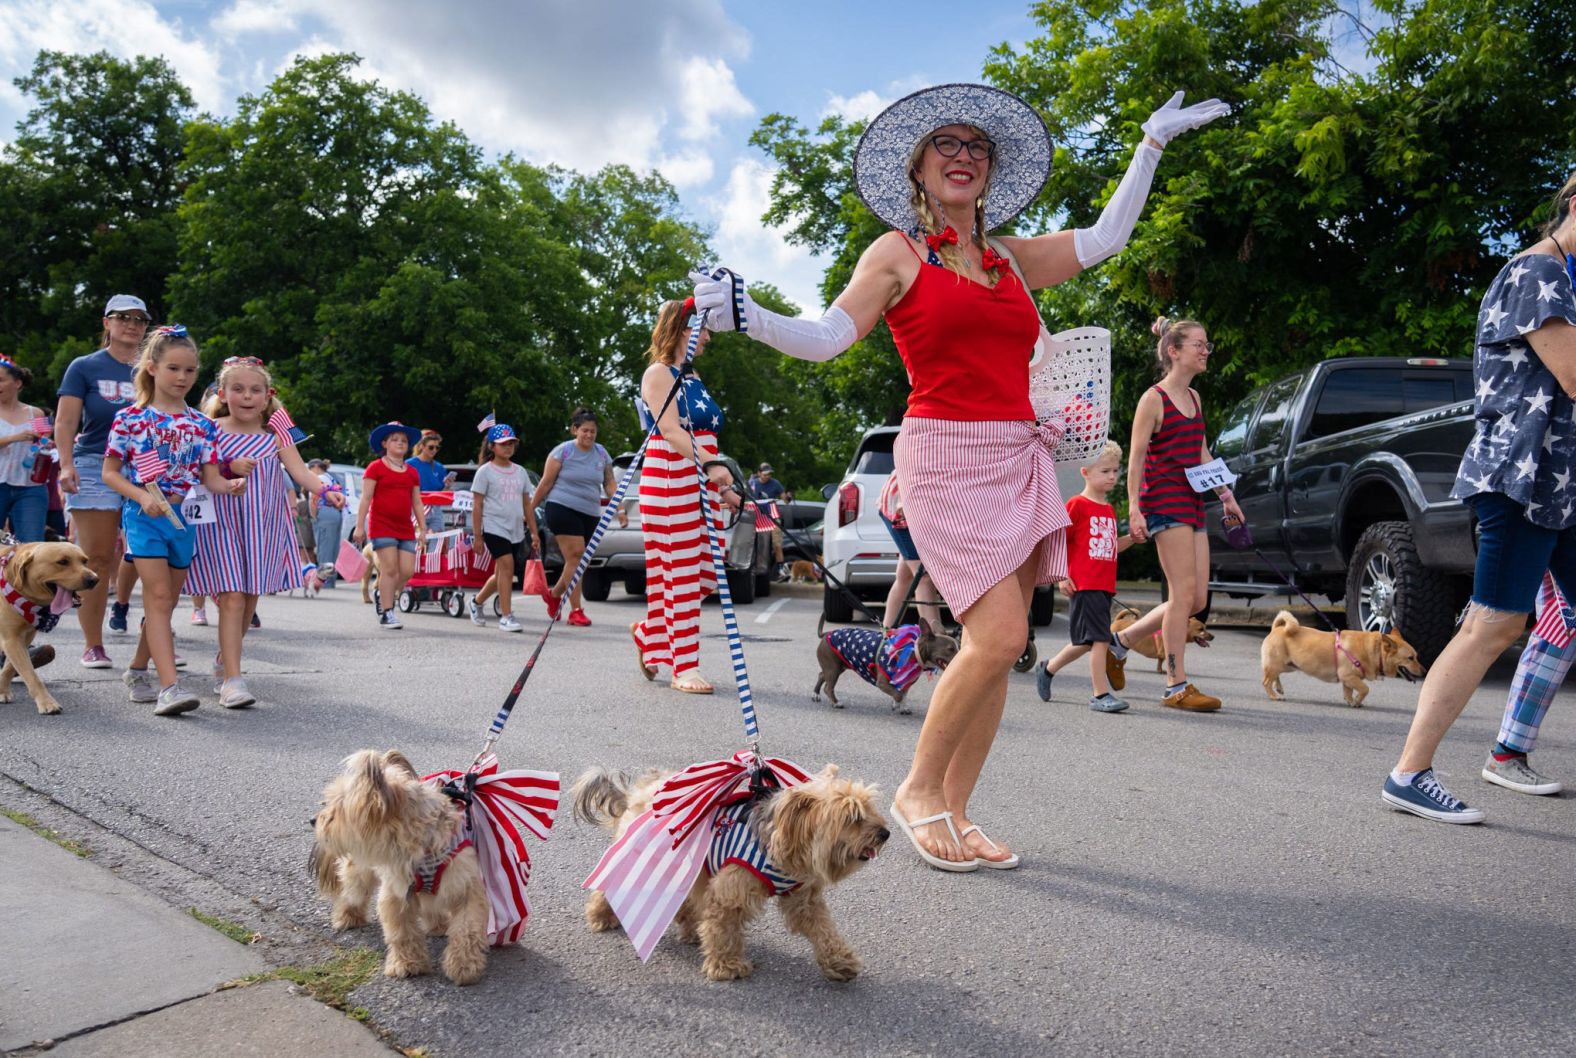 Angela Plunkett walks her dogs, Foxy and Bebe, during a patriotic pet parade Saturday in Bastrop, Texas. Plunkett and her dogs took second place in the look-alike category of the competition.